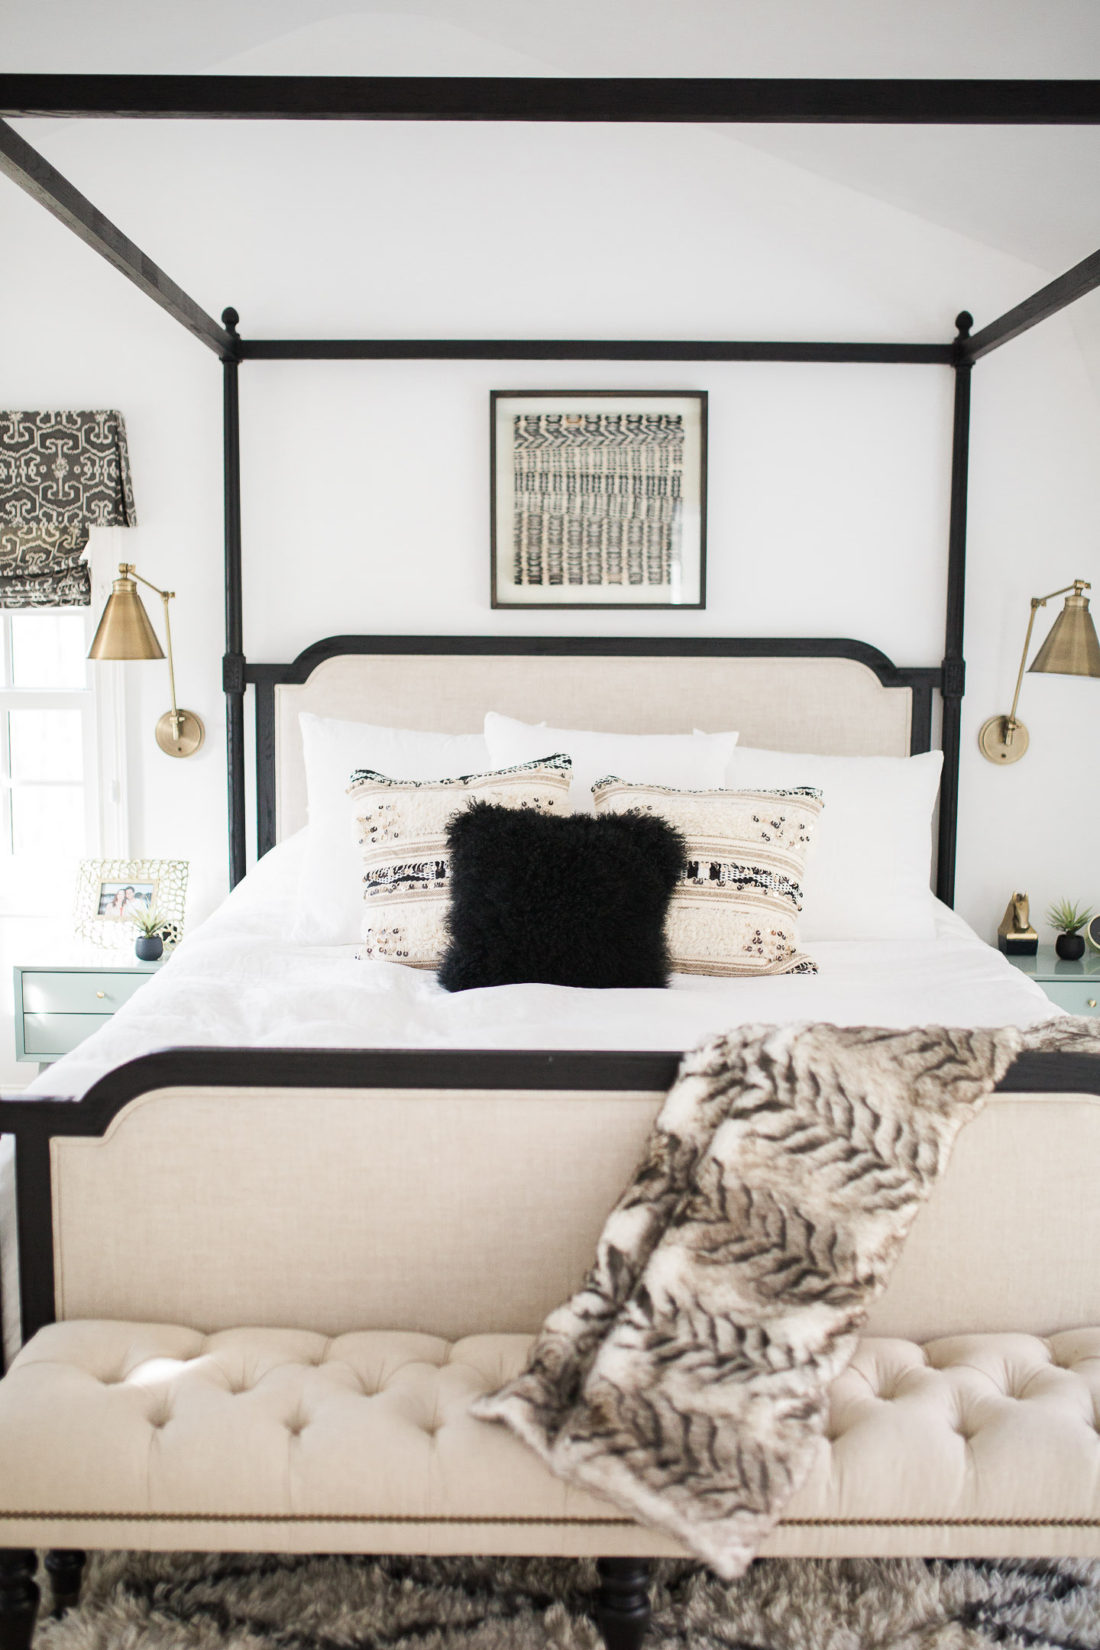 Eva Amurri Martino's black, white, and linen Master Bedroom at her home in Connecticut